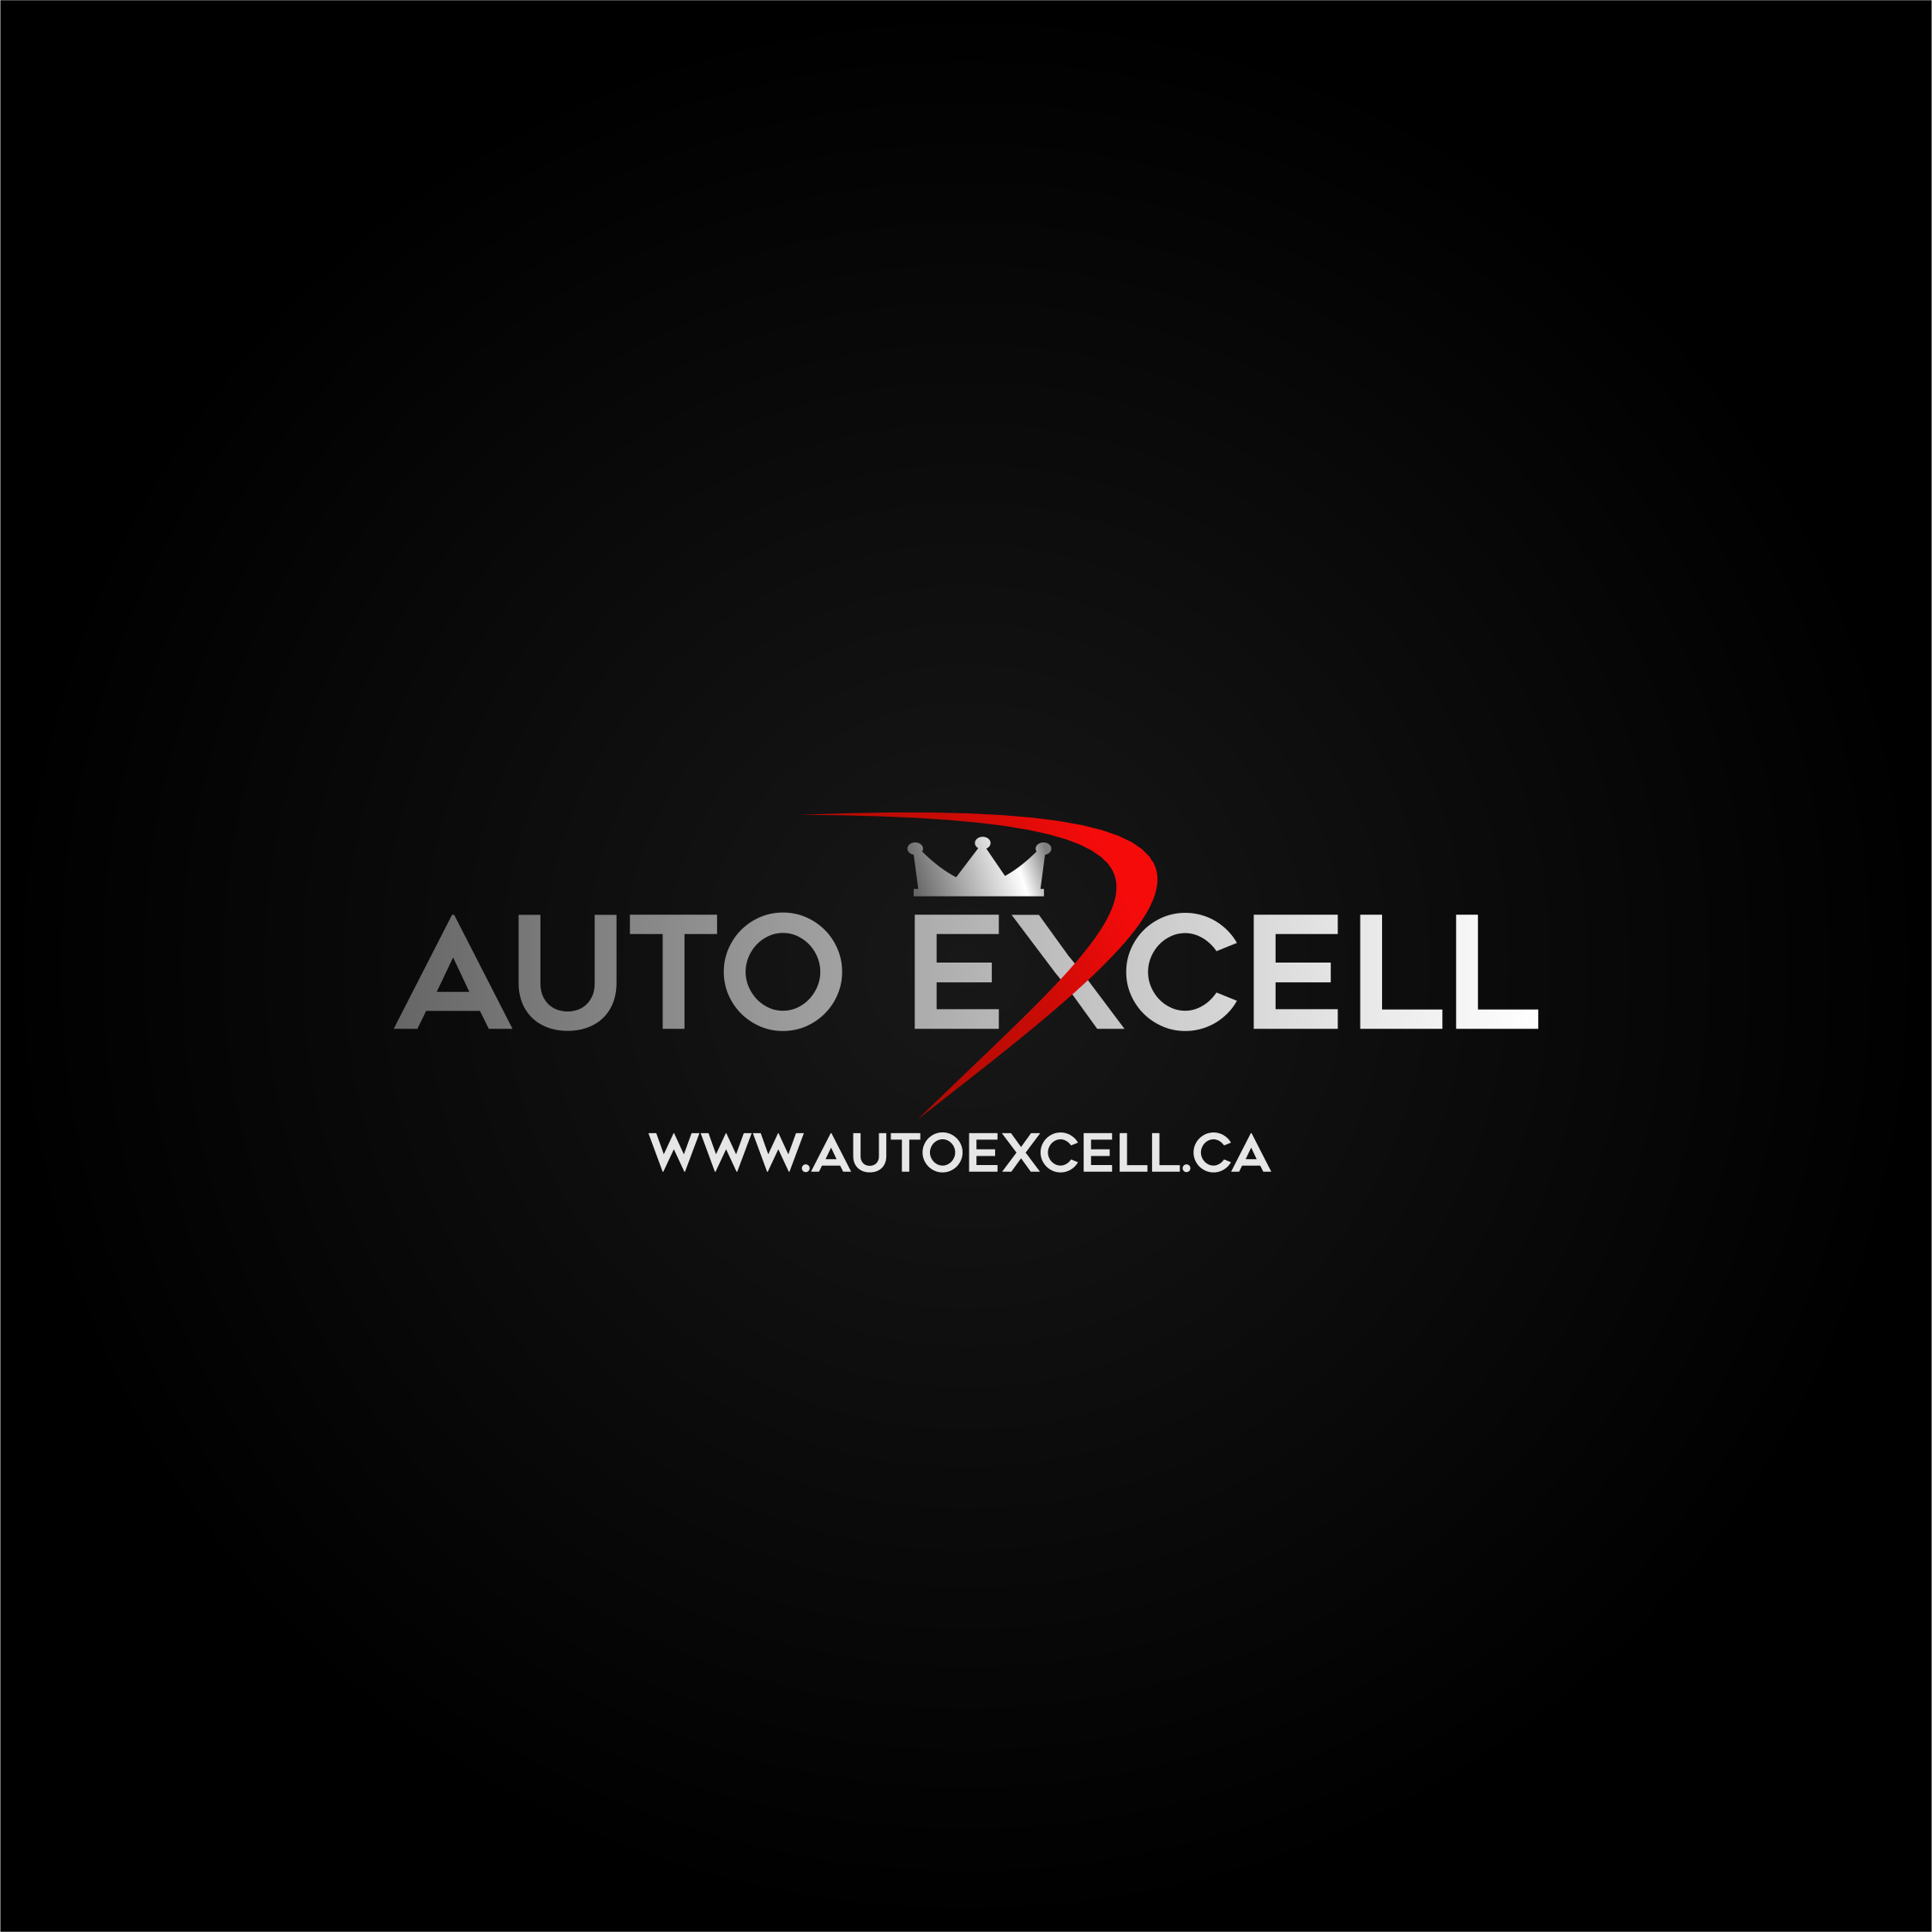 Auto Excell